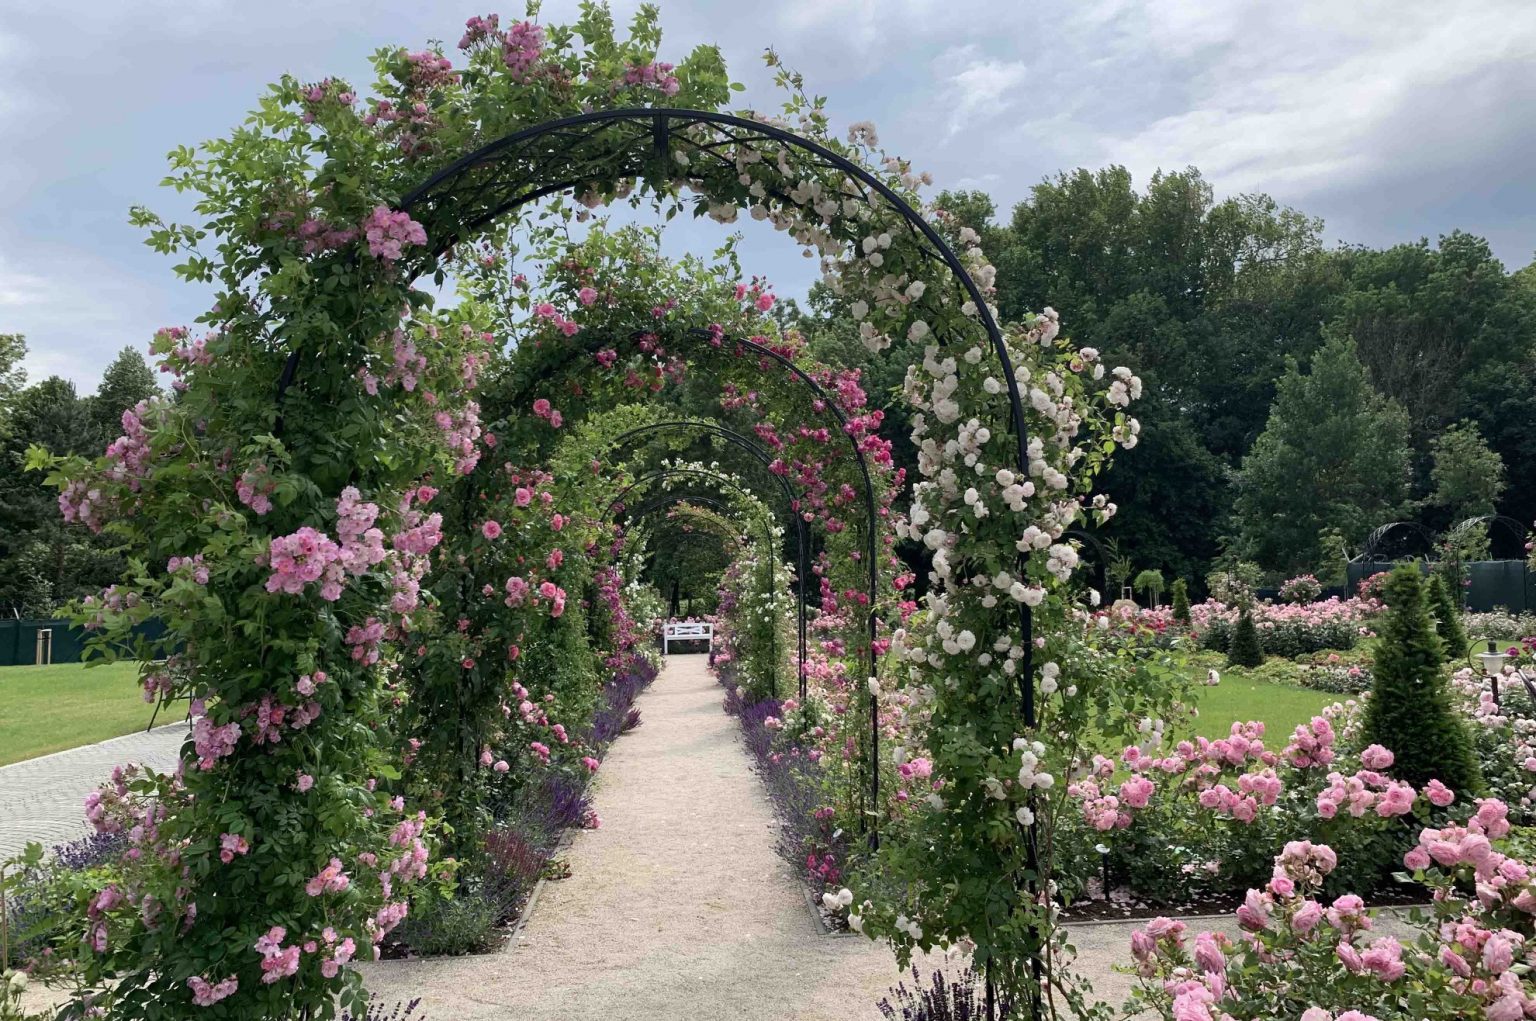 Classic Garden Elements rose arches at the Dolná Krupá rosarium in Slovakia covered in pink and white roses